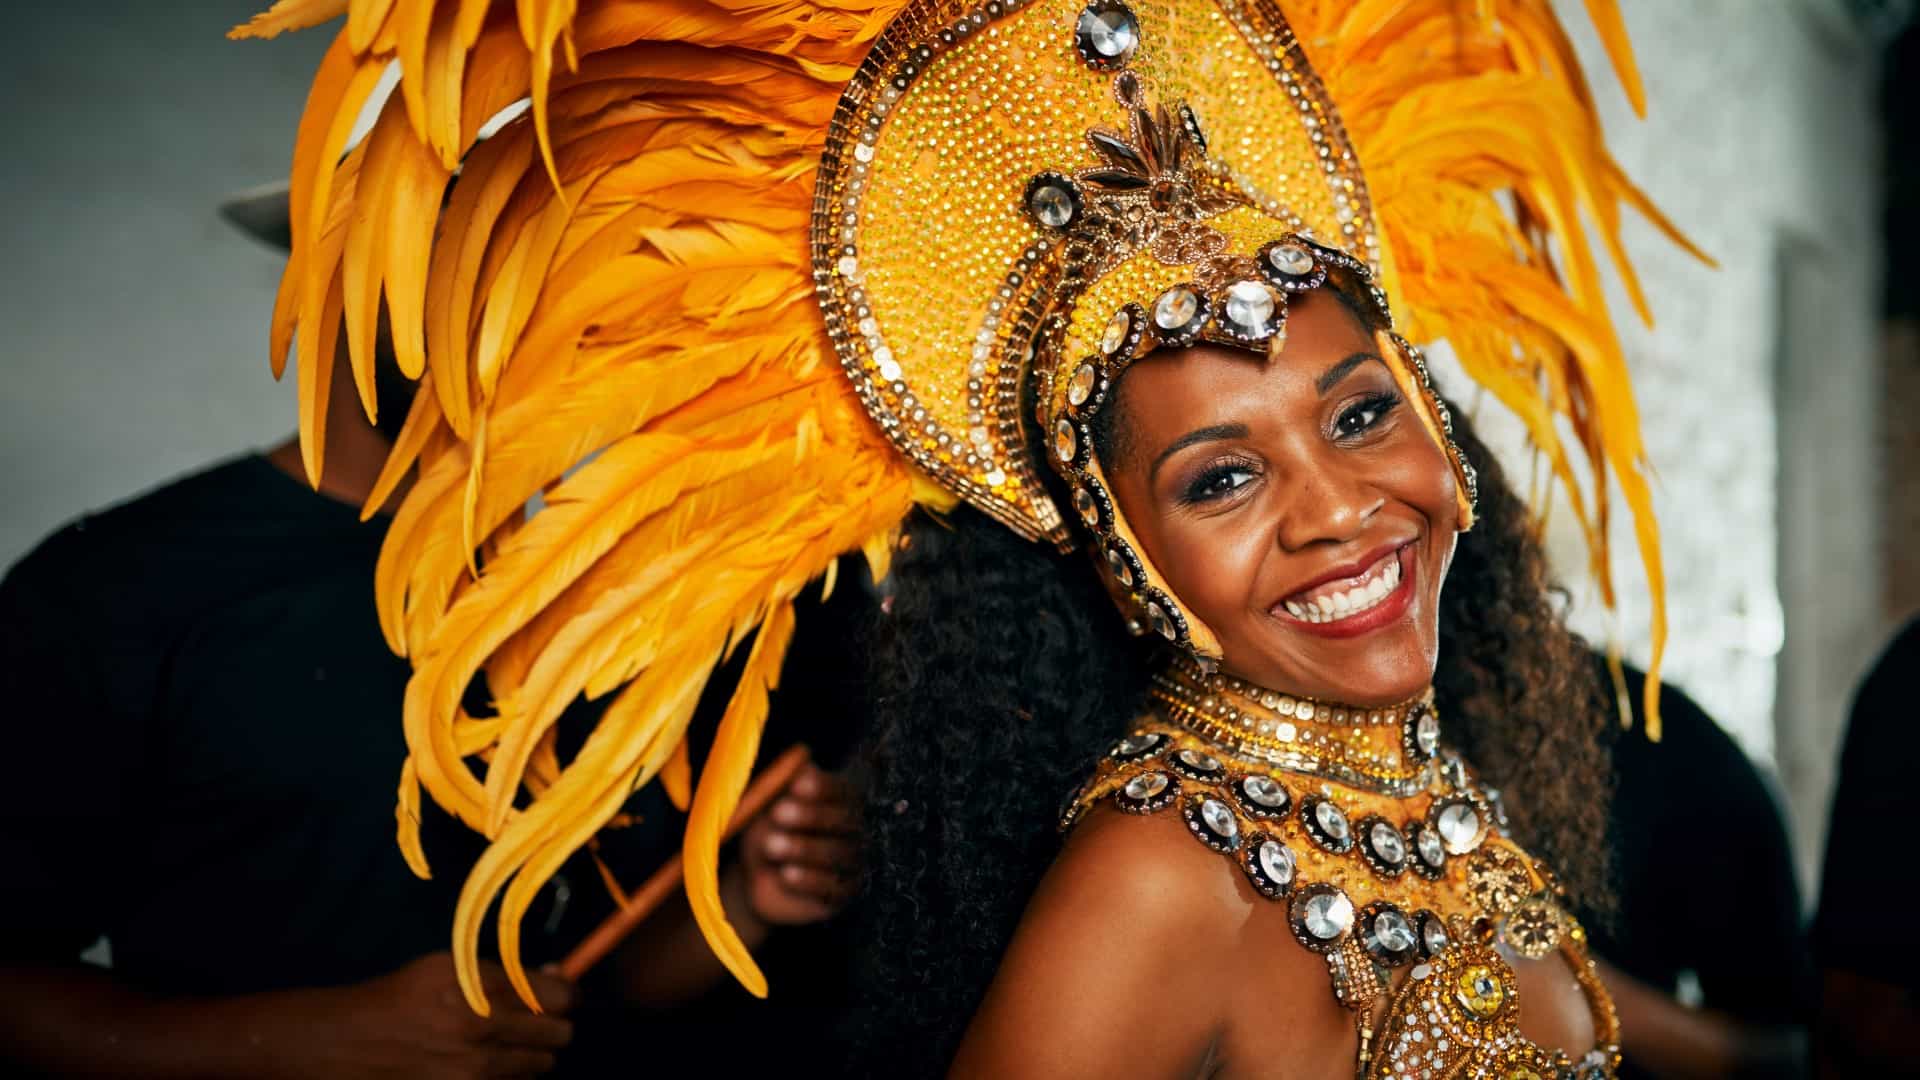 A woman dressed in a vibrant carnival costume smiles brightly. Her outfit features an elaborate headdress adorned with large yellow feathers and sparkling gems, complementing her ornate golden attire decorated with sequins and stones. The background is blurred, focusing attention on her joyful expression and festive attire.